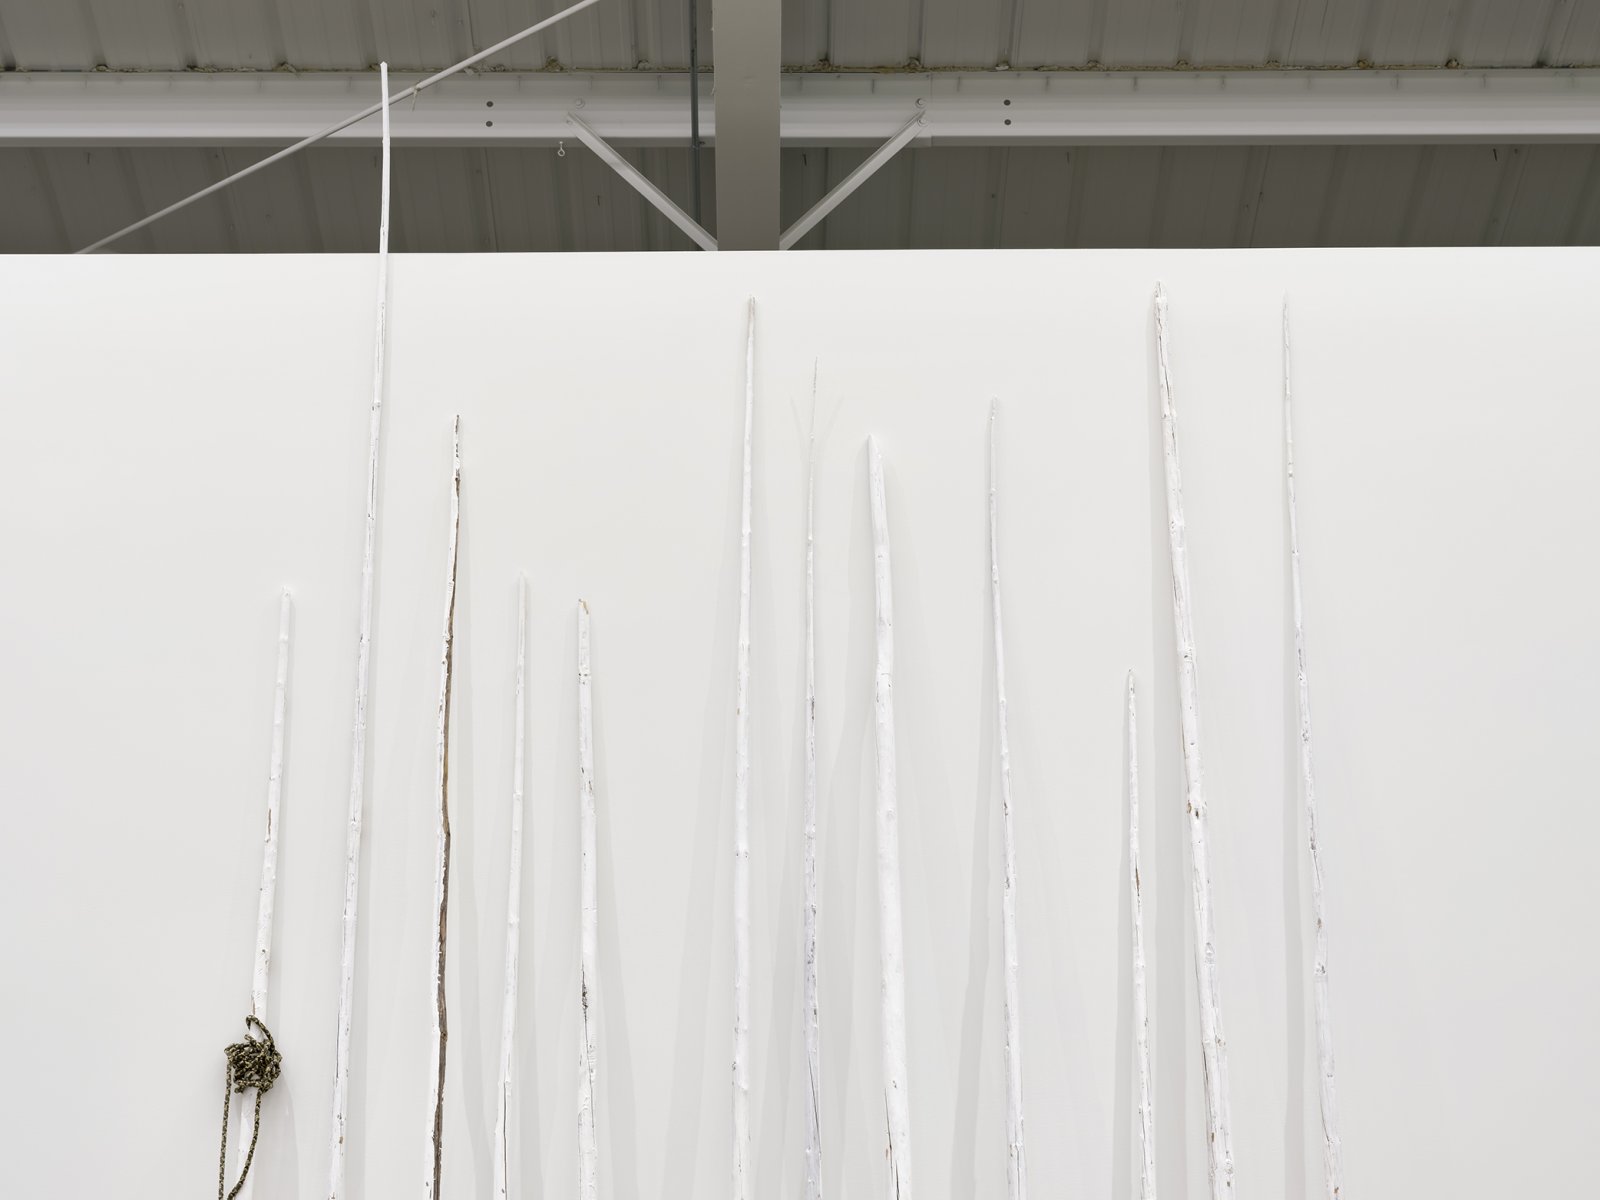 Duane Linklater, action at a distance (detail), 2020, teepee poles, paint, nylon rope, plants, plates, ceramics, sandbags, frames, 12 digital prints, mirror, 233 x 102 x 66 in. (592 x 259 x 168 cm) by Duane Linklater